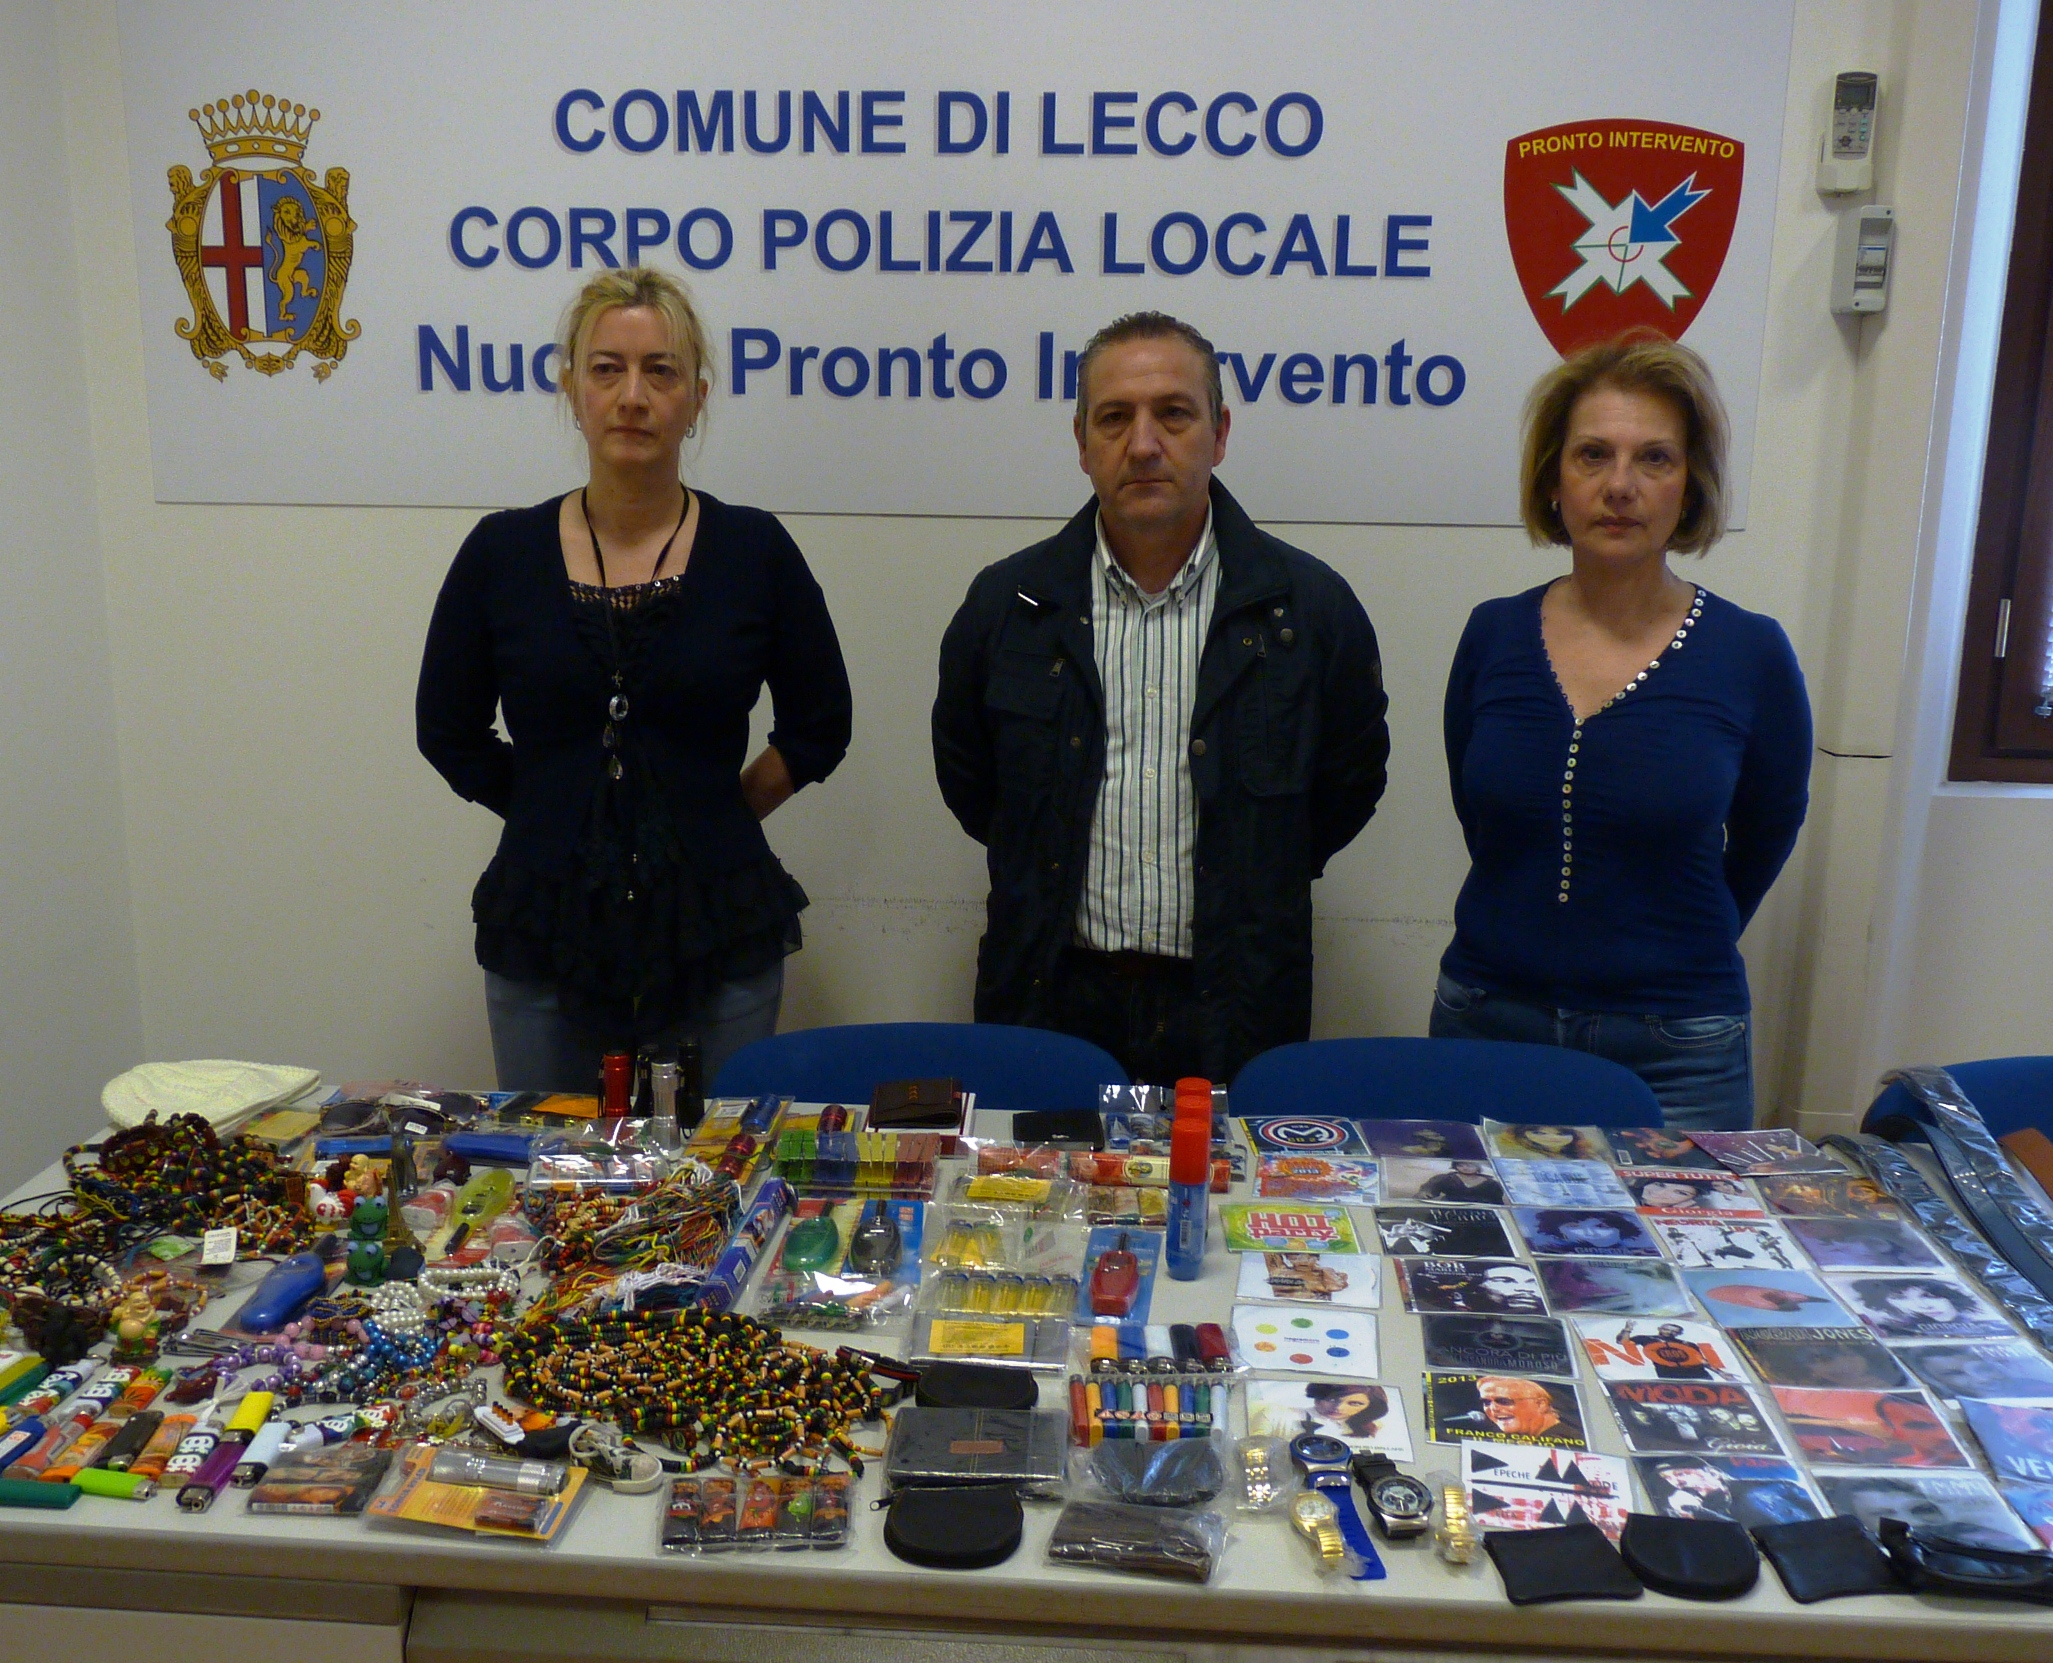 https://lecconews.news/wp/wp-content/uploads/2013/04/sequestro-PL-lecco.jpg